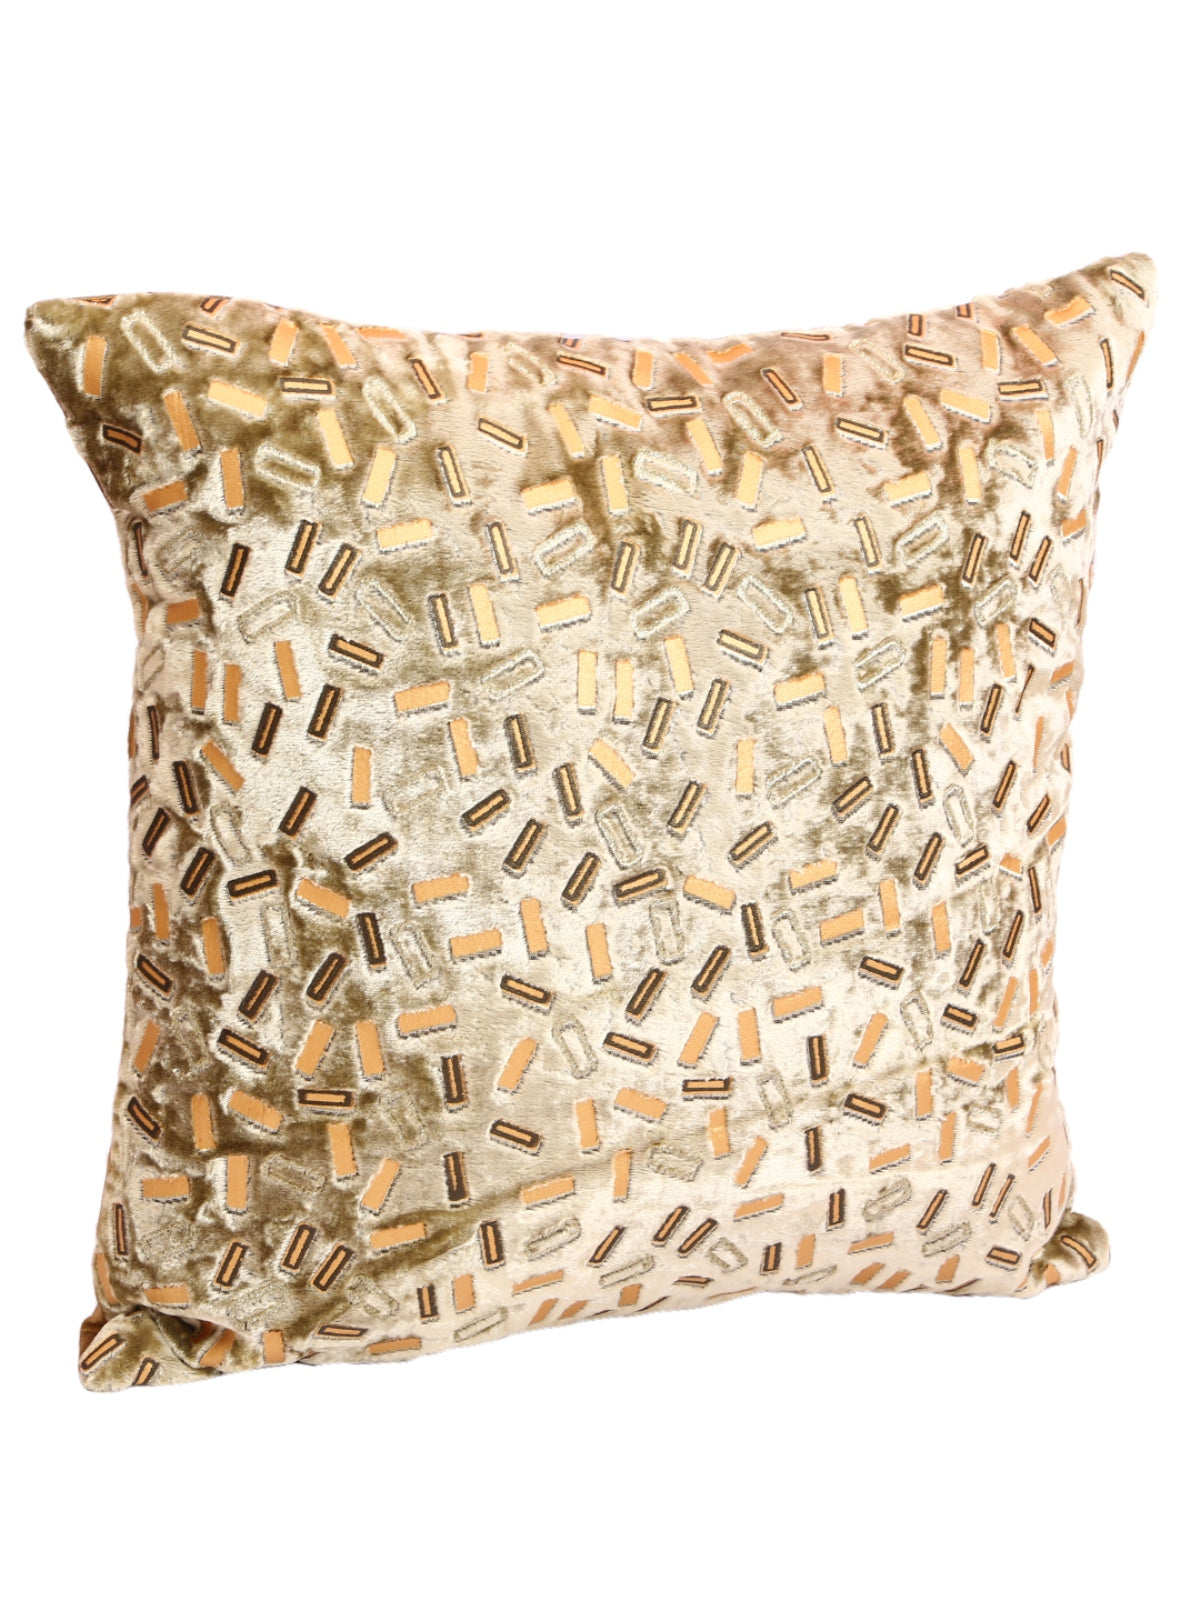 Gold Set of 5 Velvet 16 Inch x 16 Inch Cushion Covers